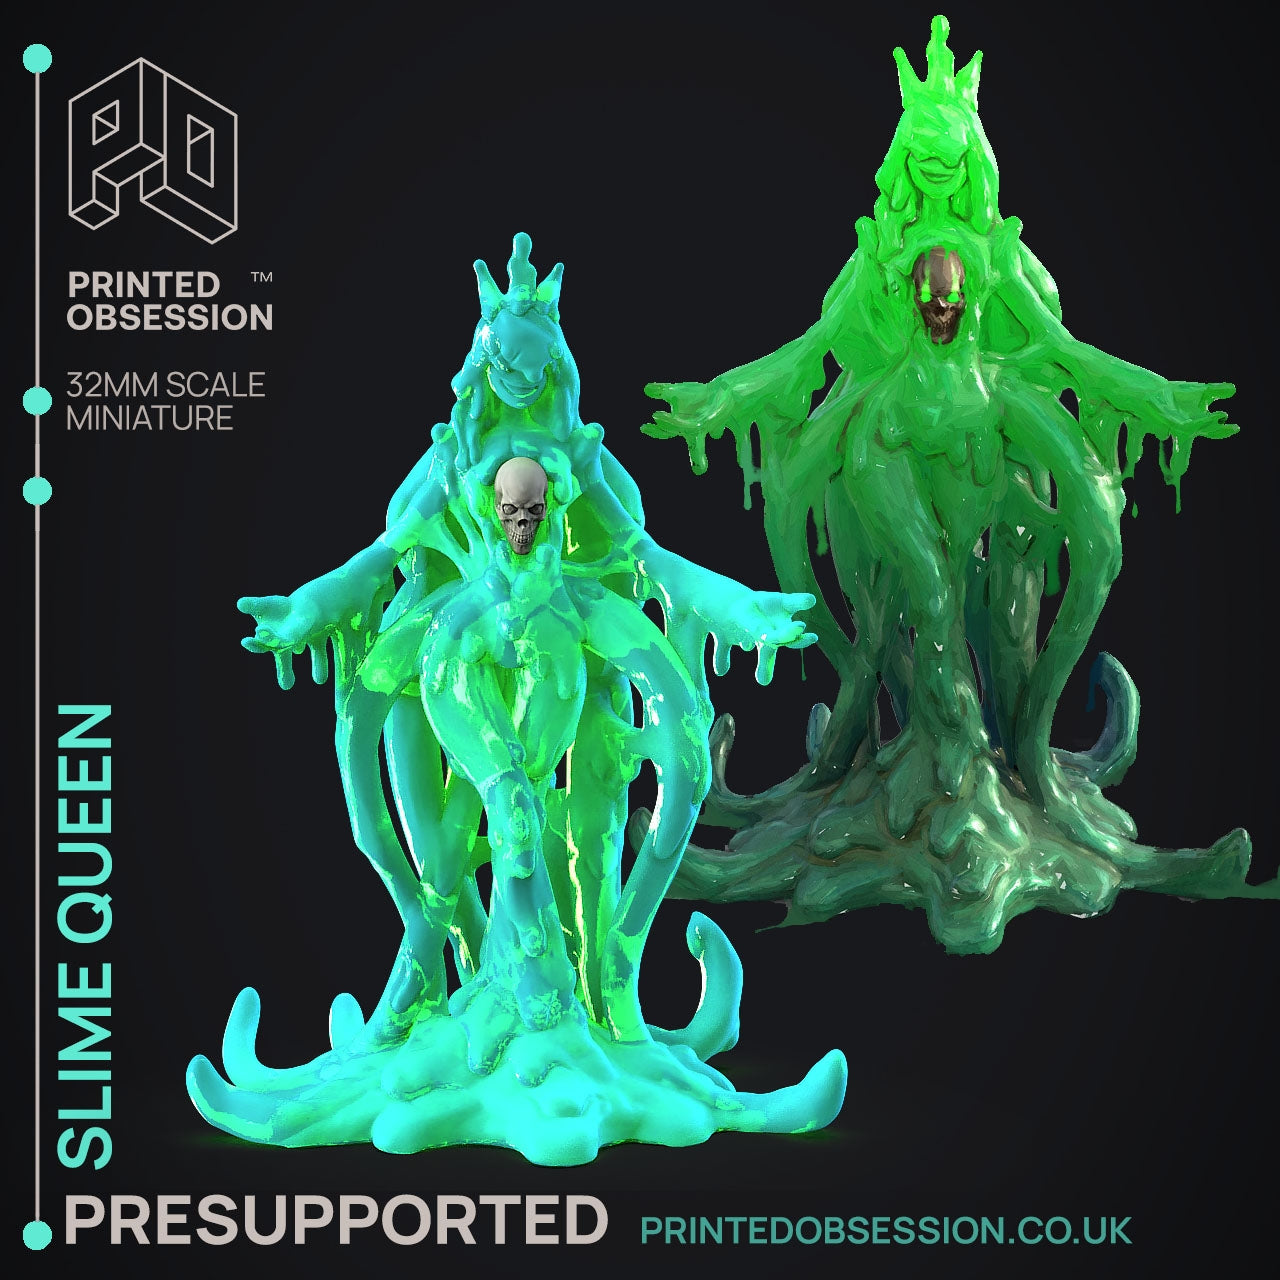 Slime Queen - The Printed Obsession - Table-top mini, 3D Printed Collectable for painting and playing!